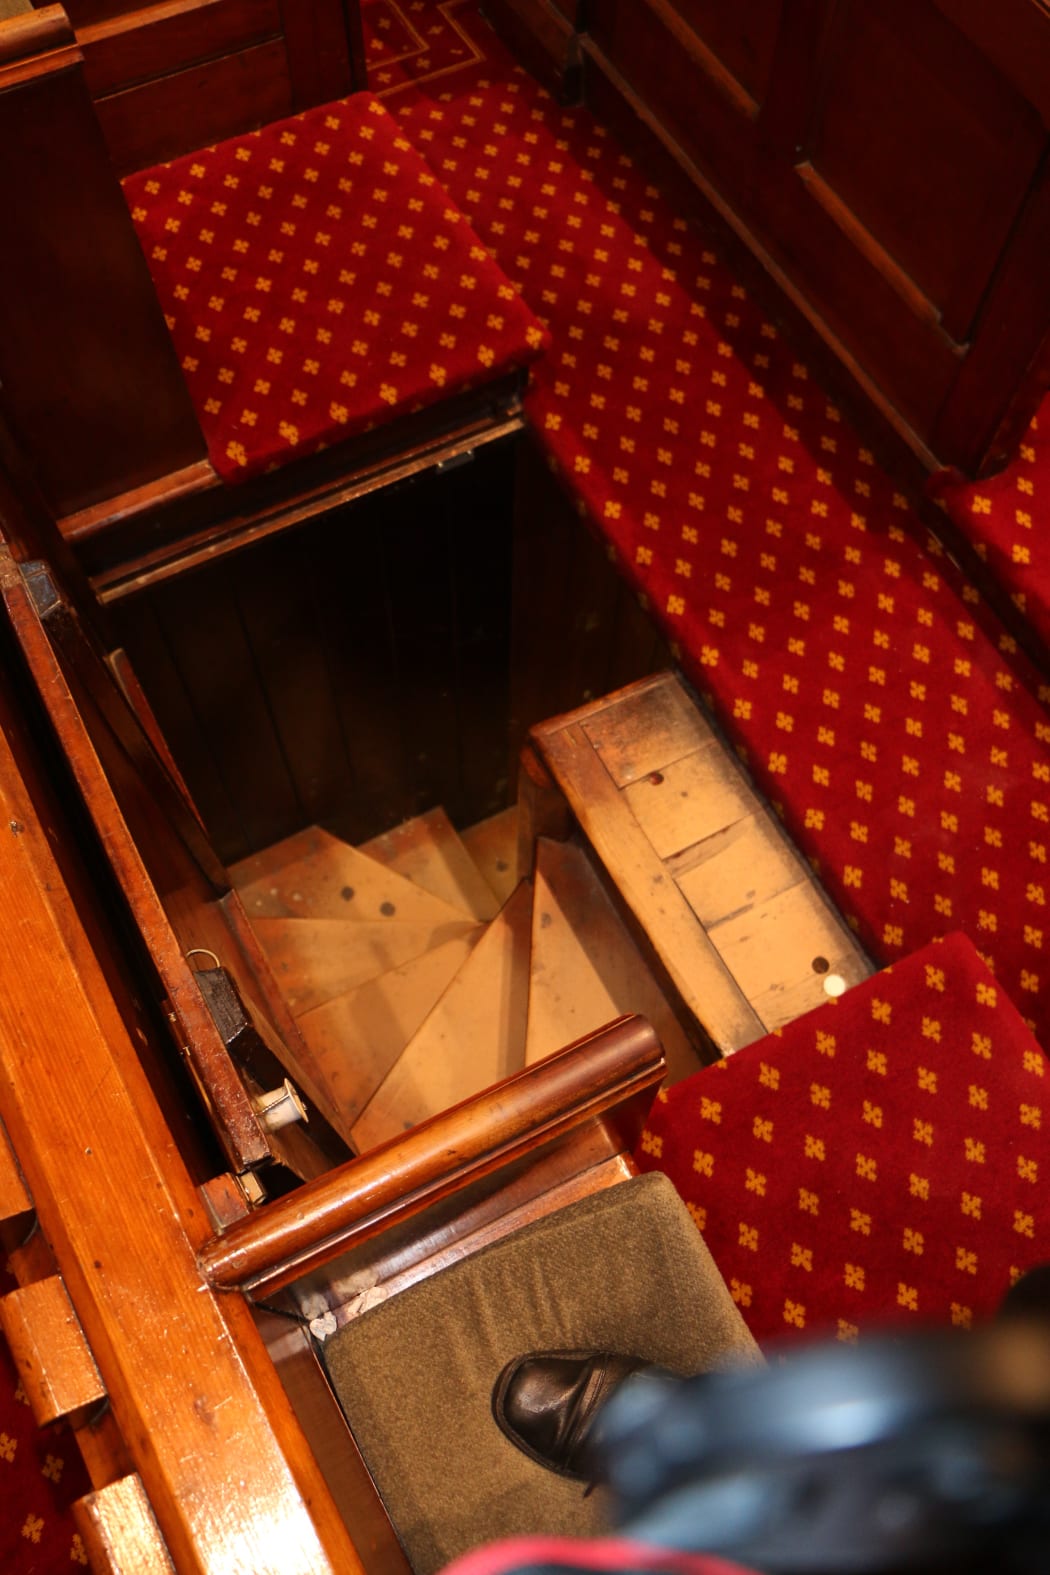 The trap door leading to cells below court room one.